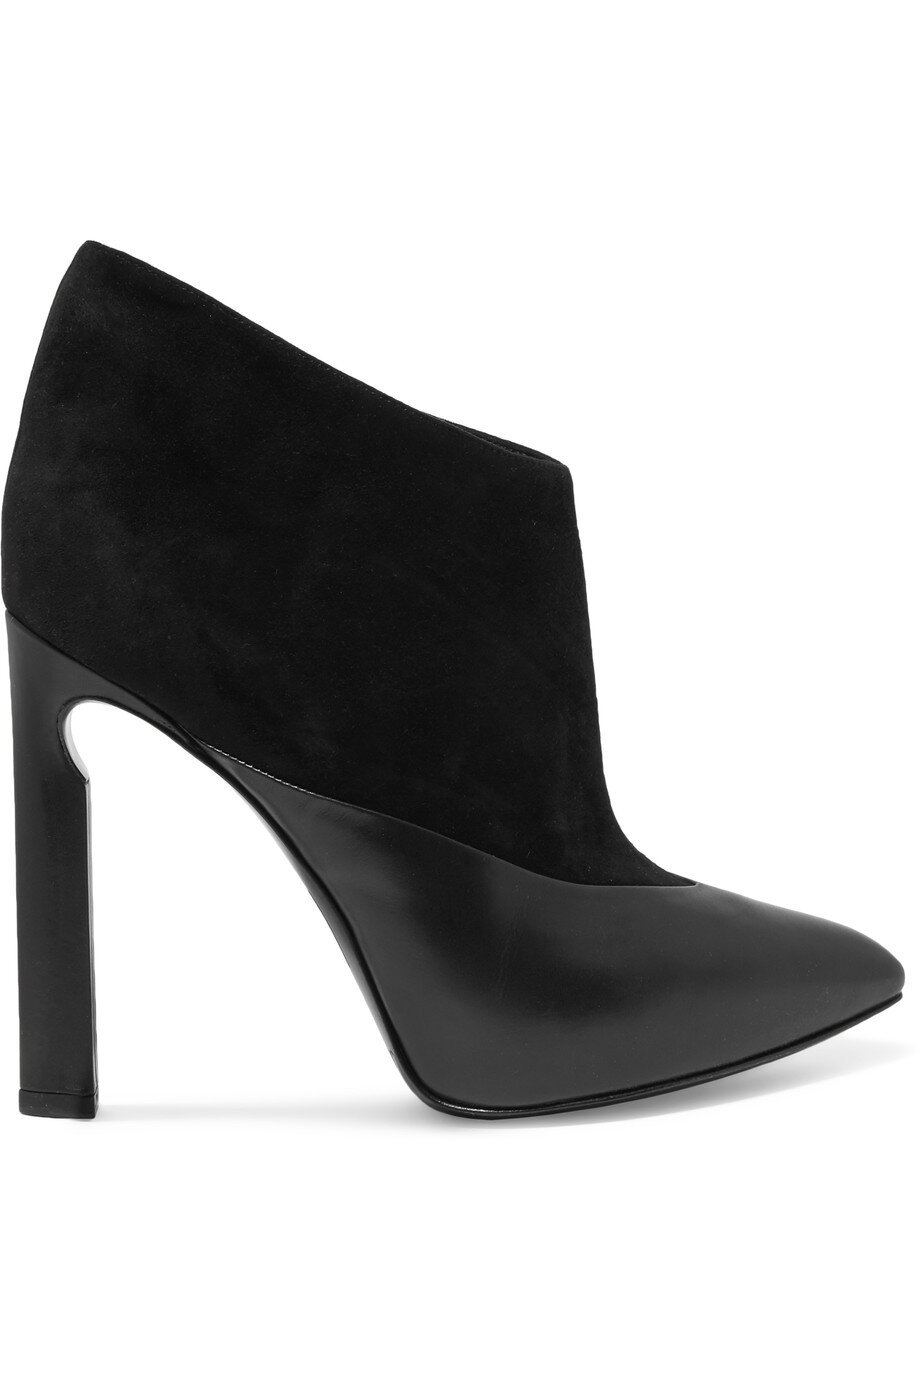 Jimmy Choo Diad Suede and Leather Ankle Boots.jpg